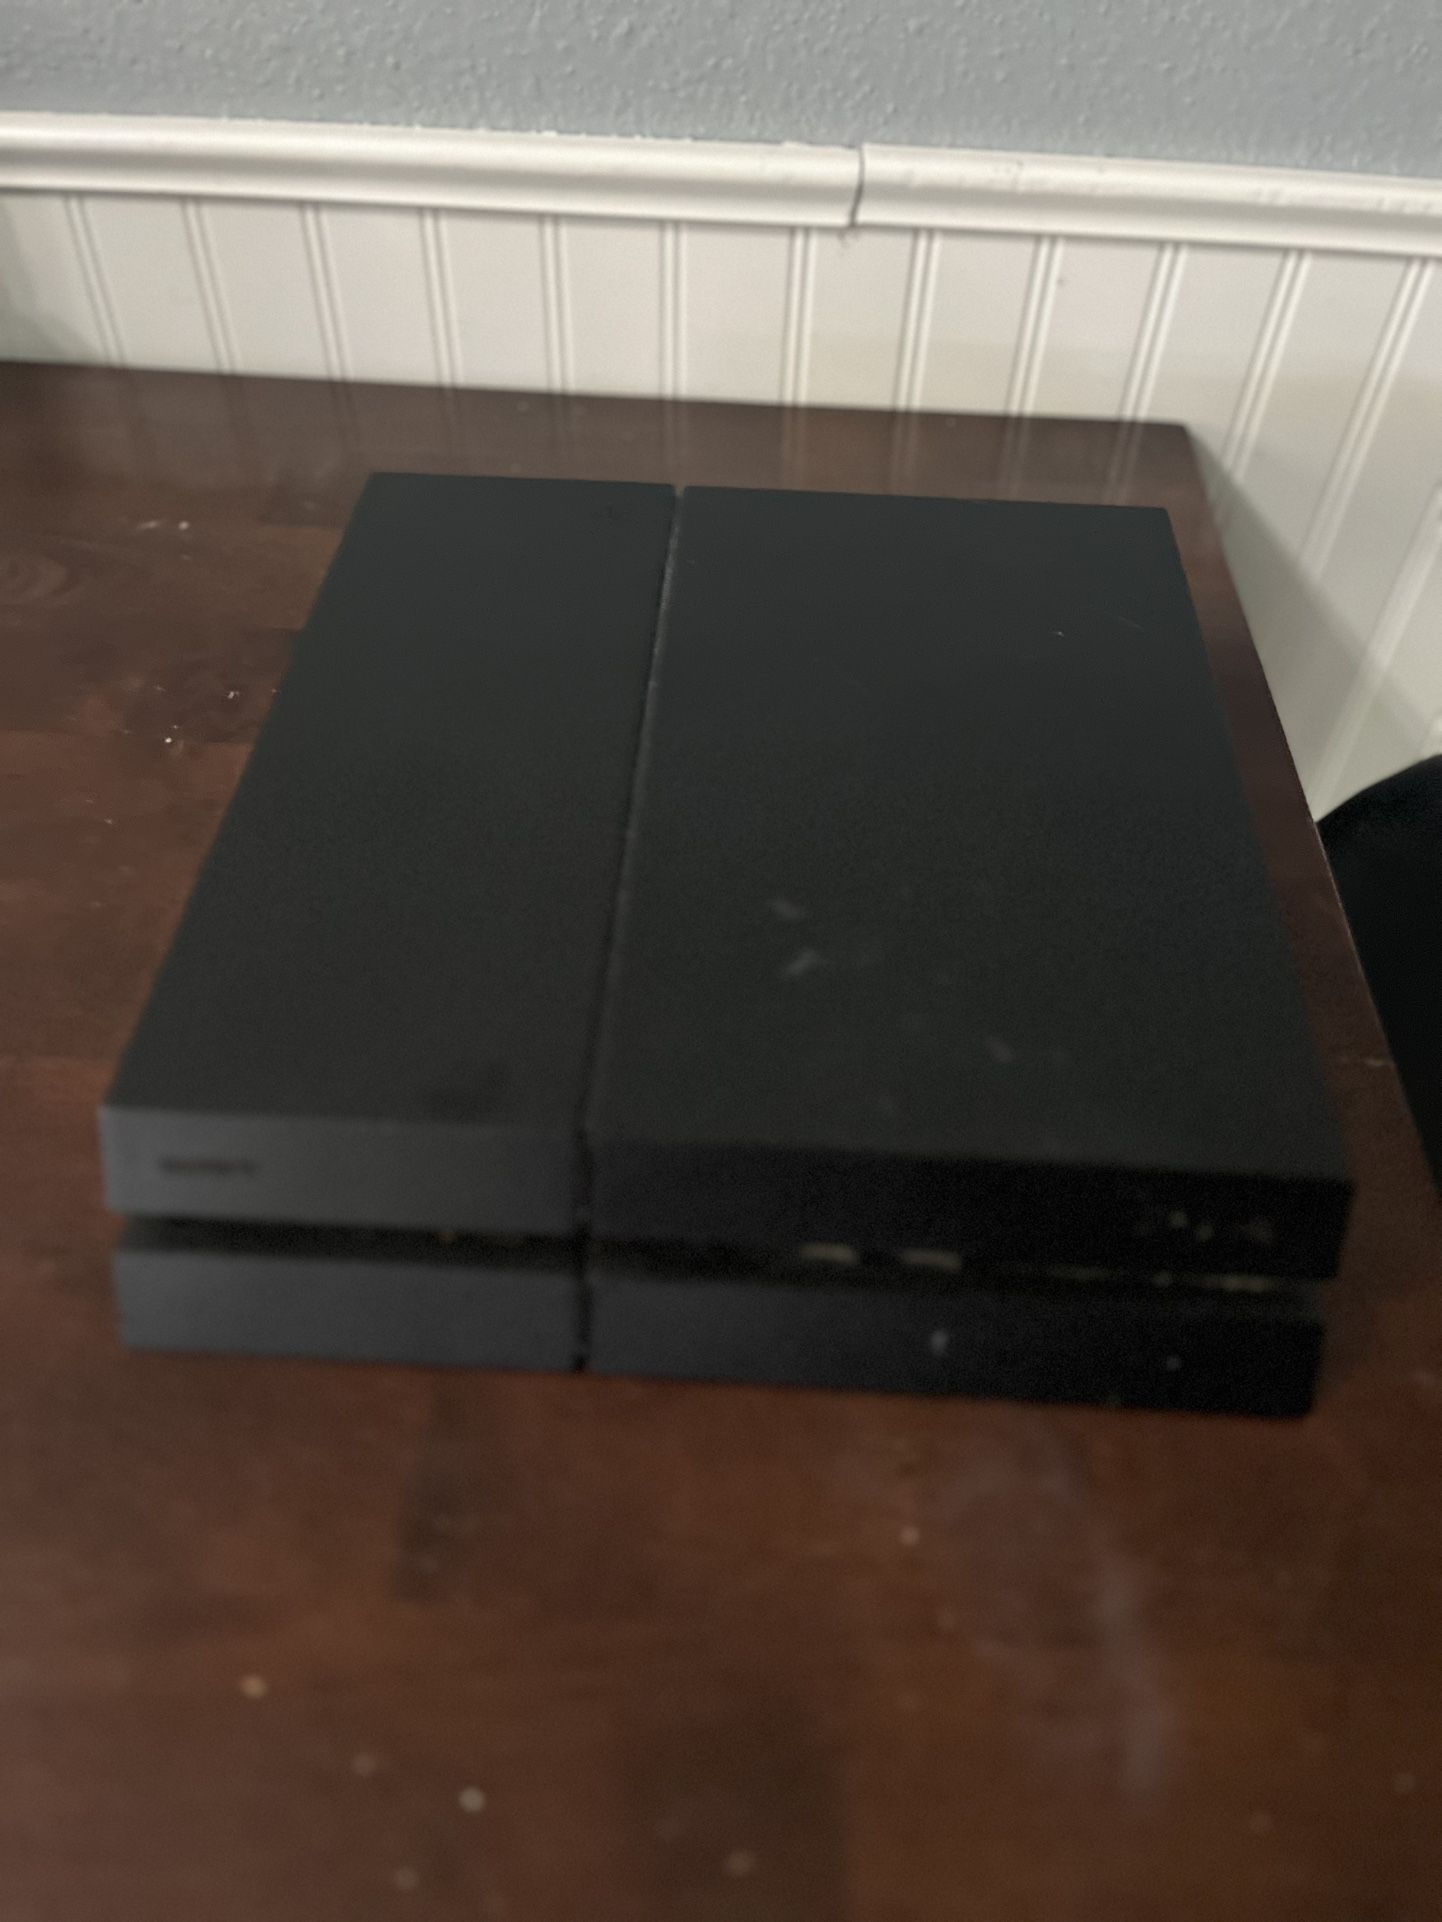 PS4 (Console Only)